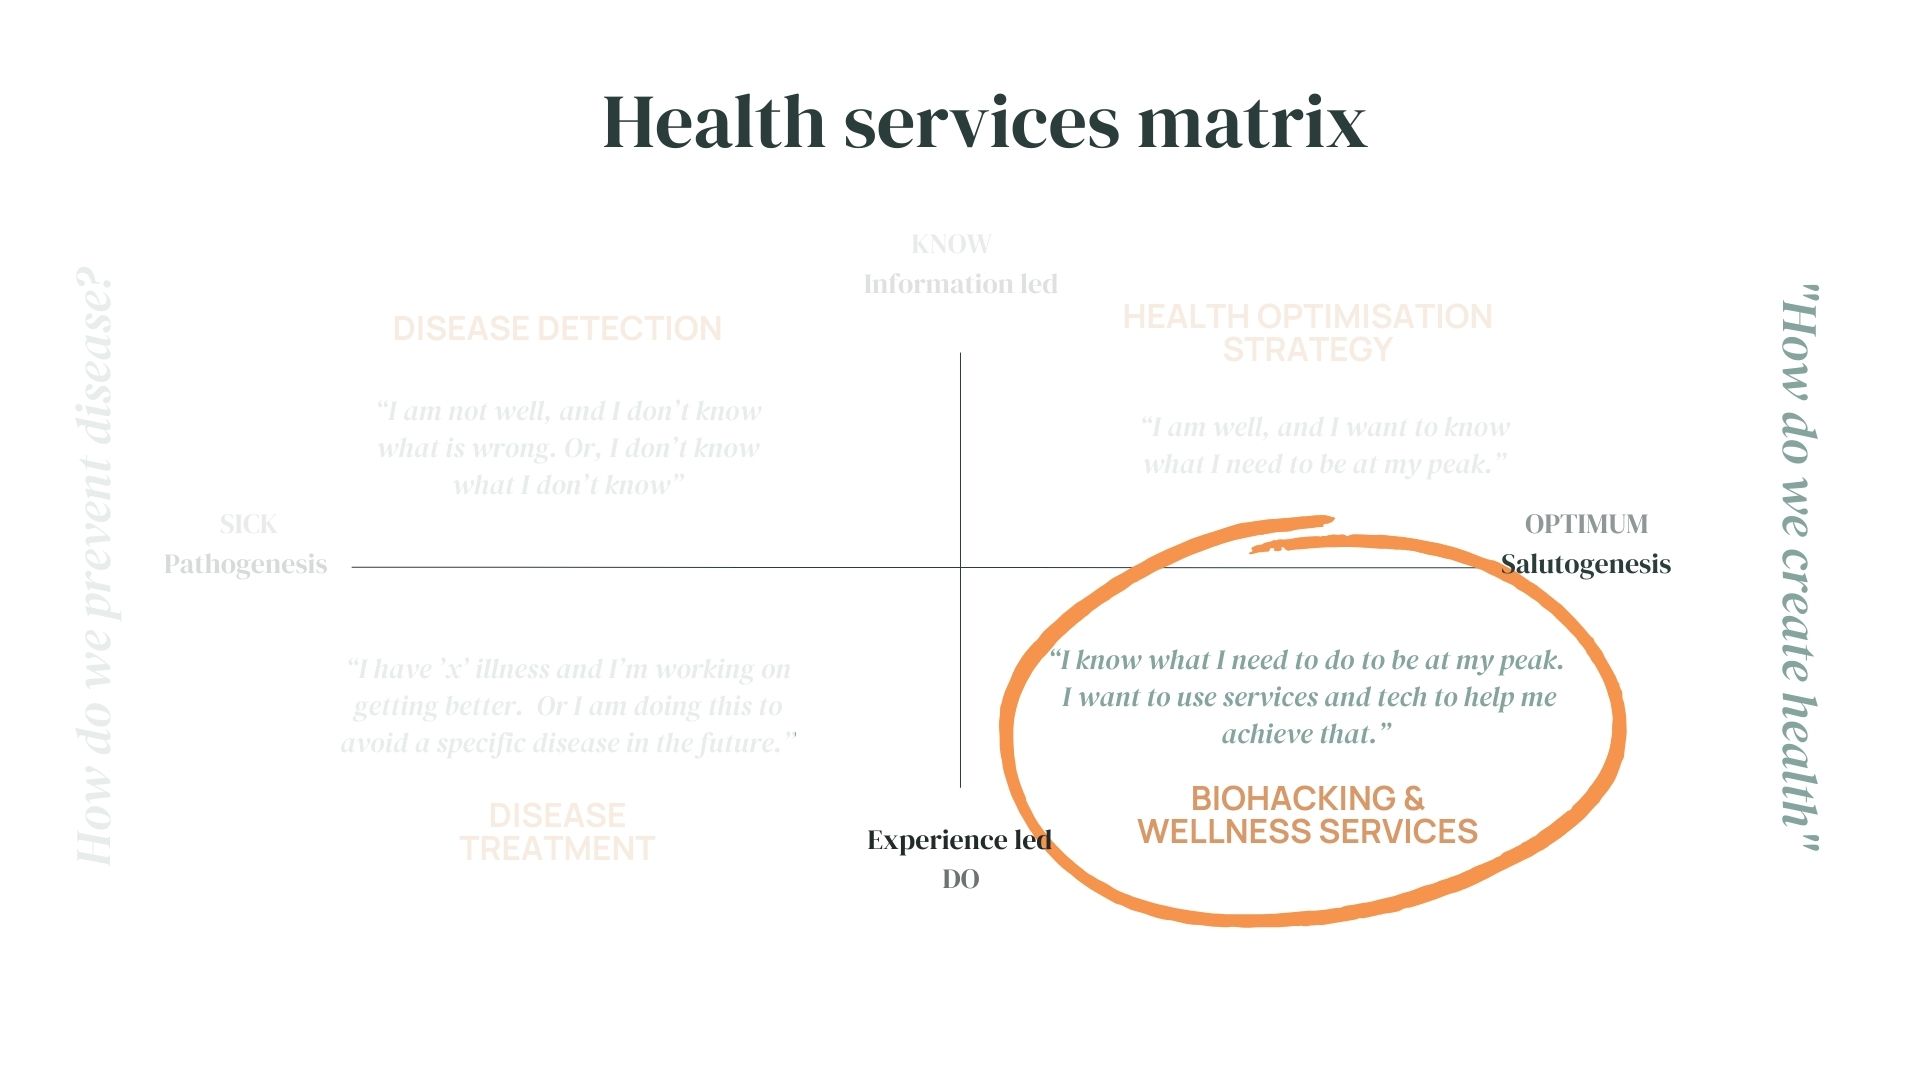 zoomed in section of health services matrix focusing on biohacking and wellness services